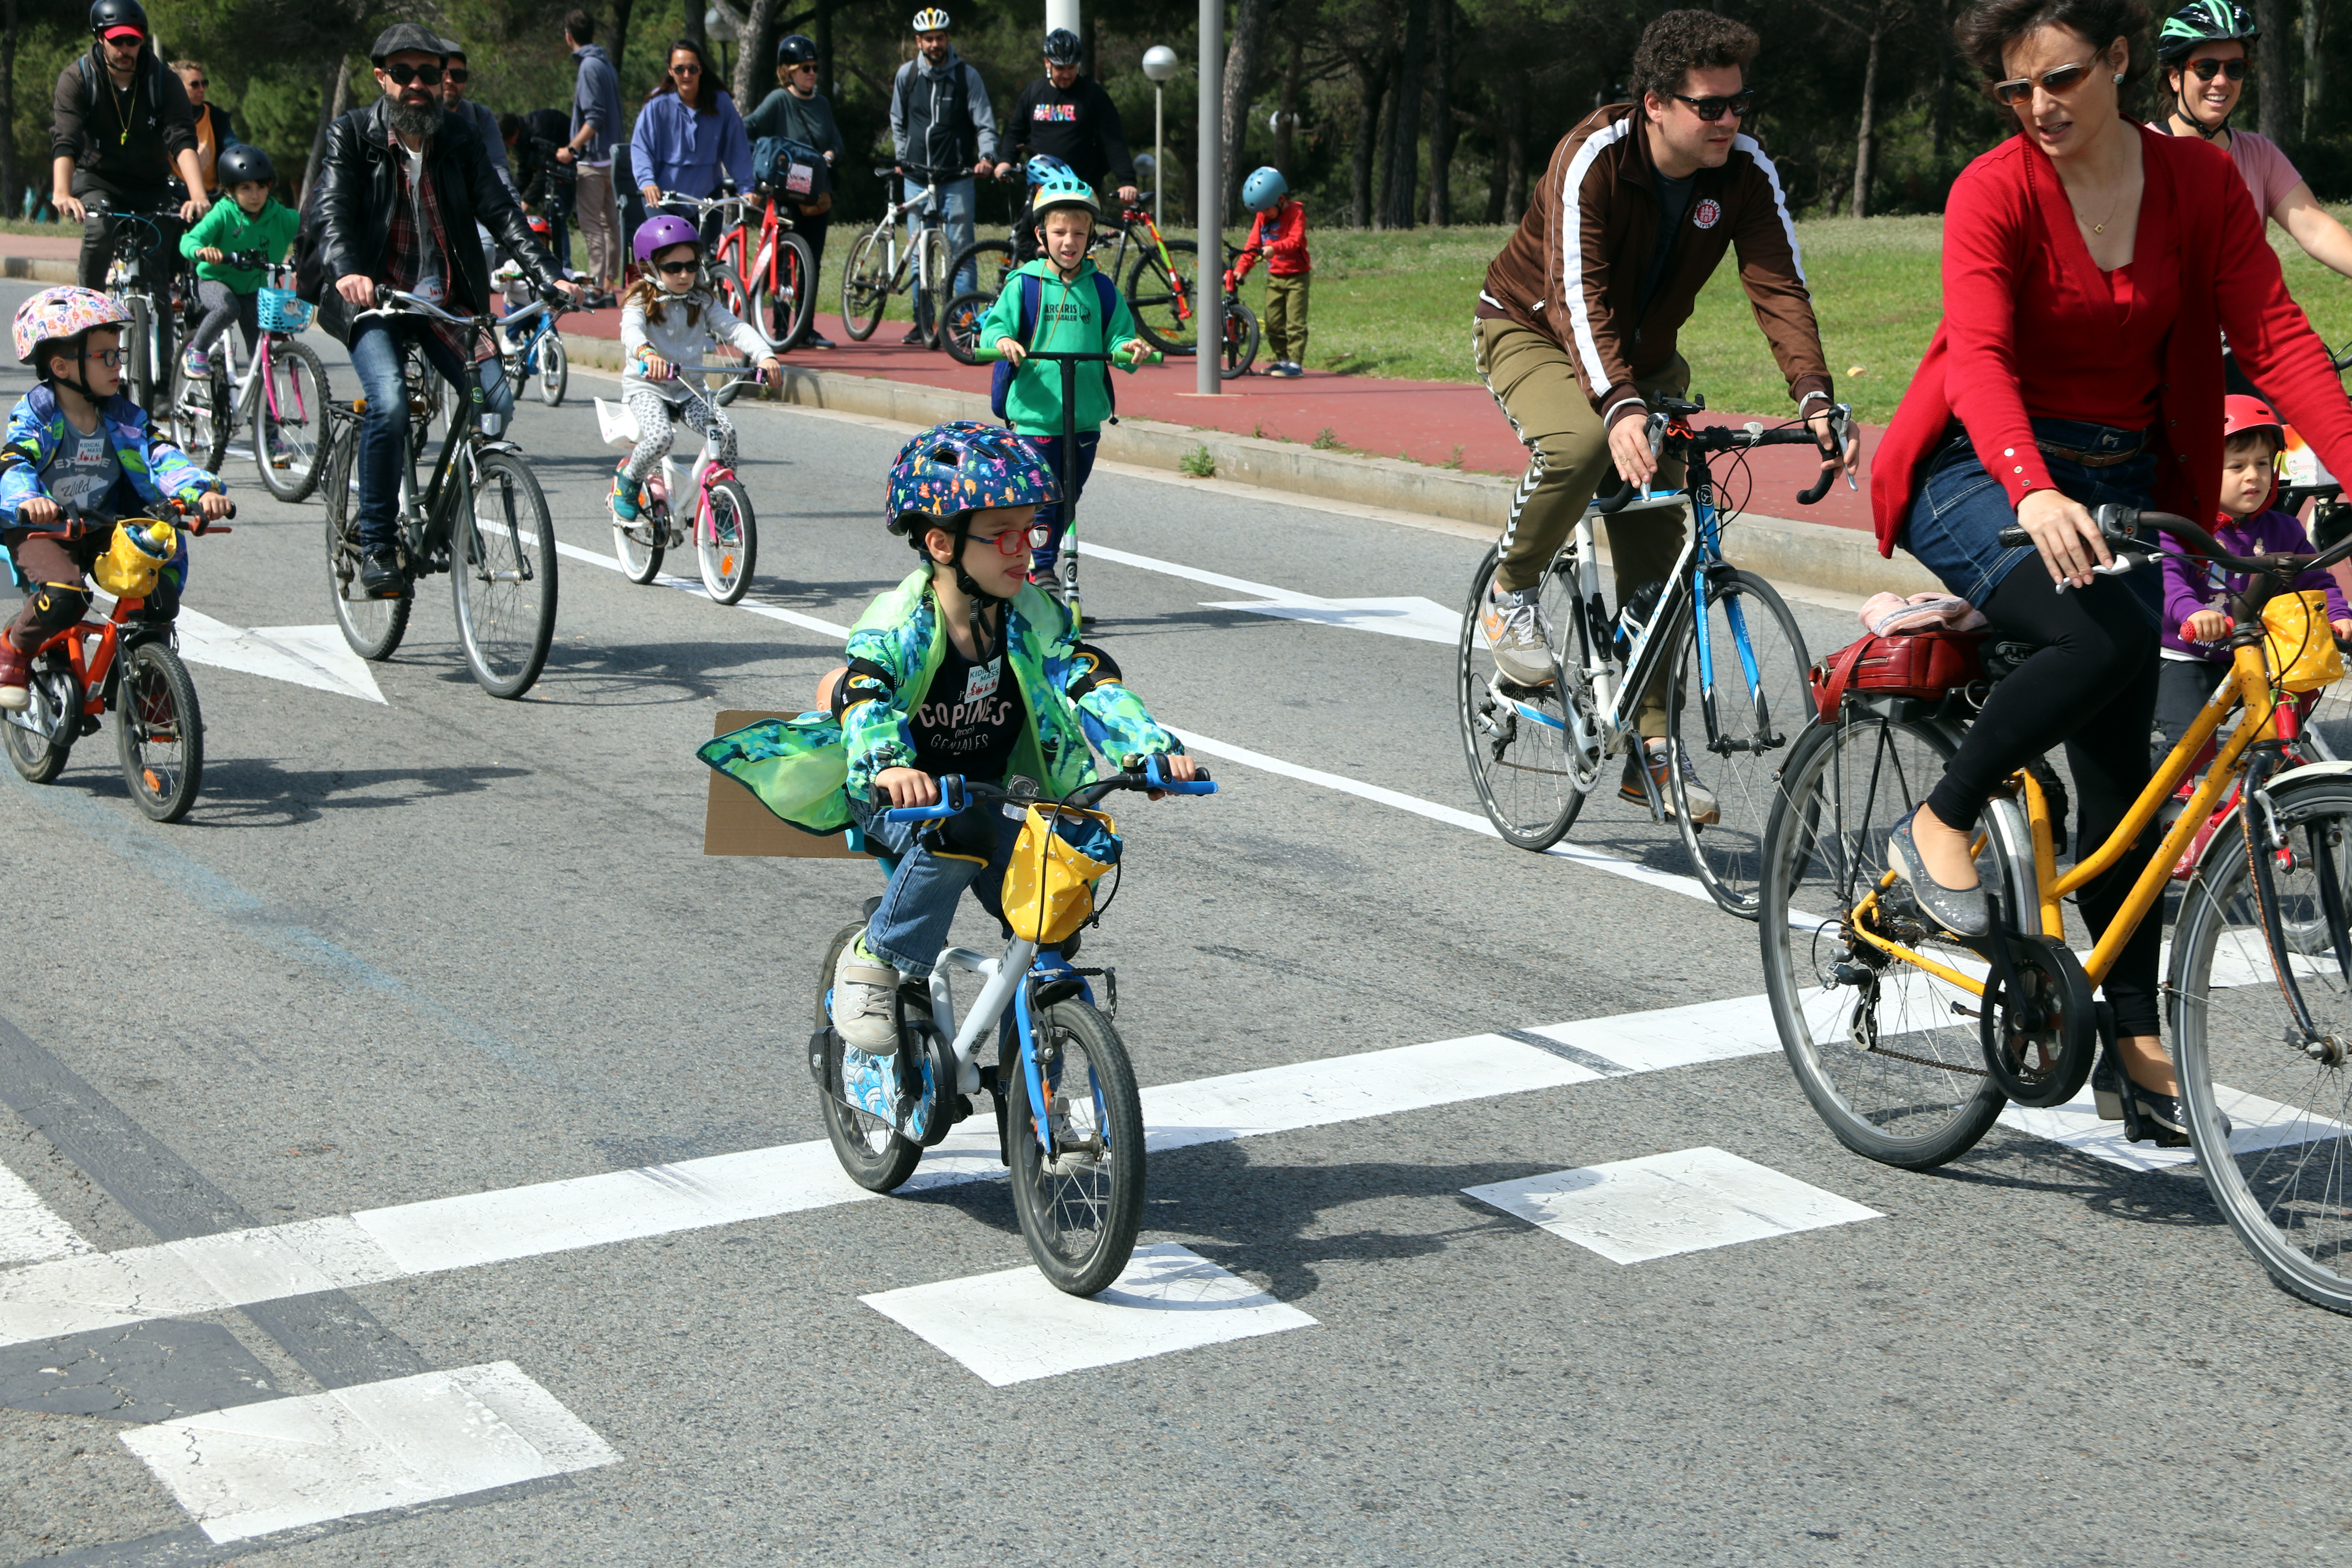 People of all ages joined to raise awareness on children's bike-safety